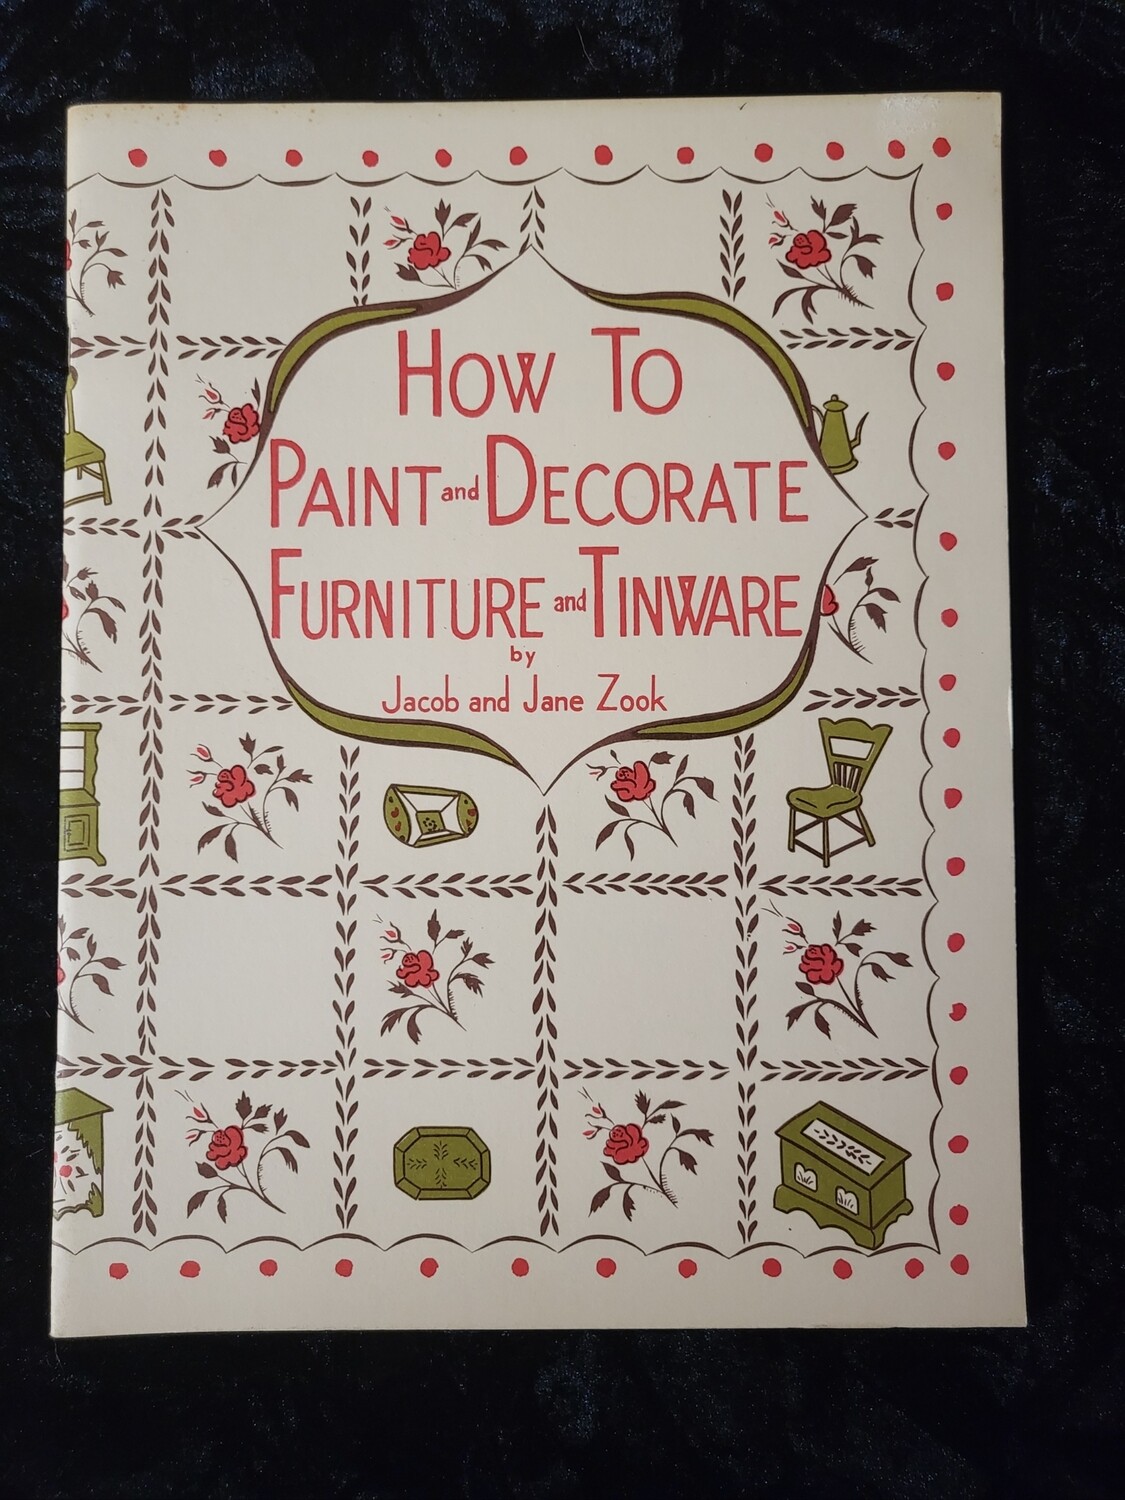 How to Paint and Decorate Furniture and Tinware